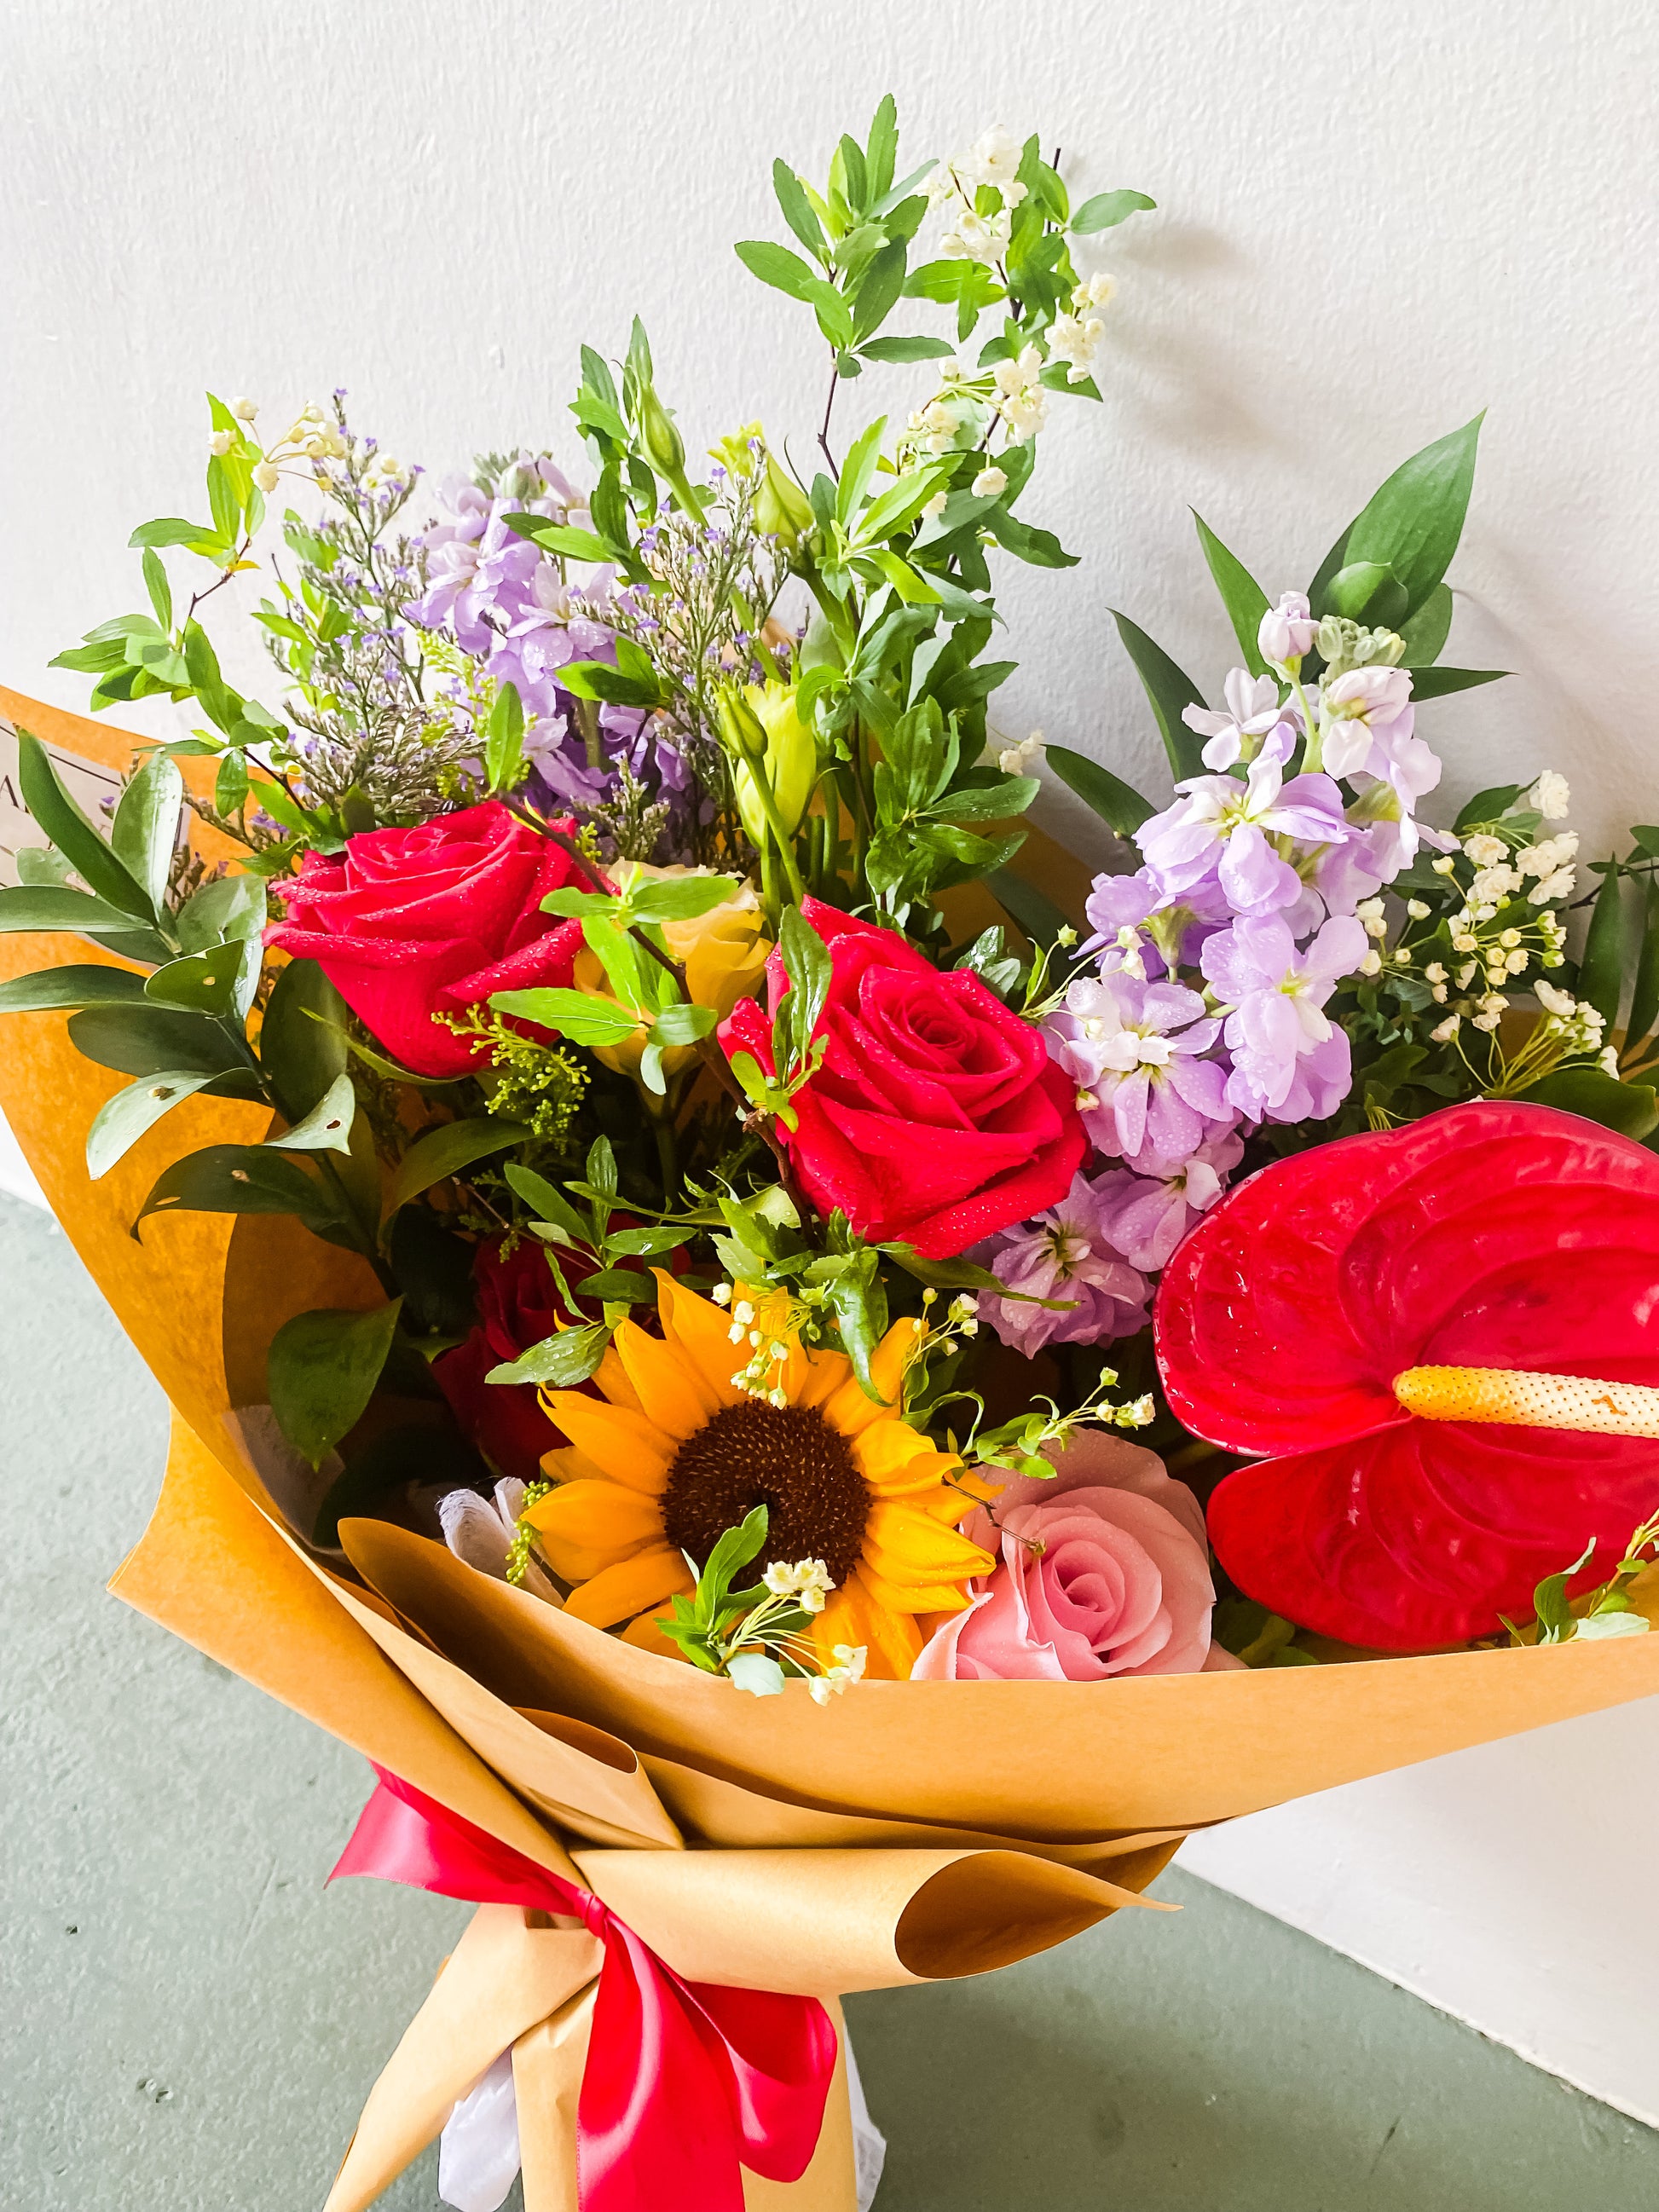 Any Day Florist​​​​​​
​'Premium Omakase Flower Bouquet'
Are you still confused about what to purchase? Are you looking to surprise yourself with something special? Let us arrange fPremium Omakase | Large Premium Bouquet